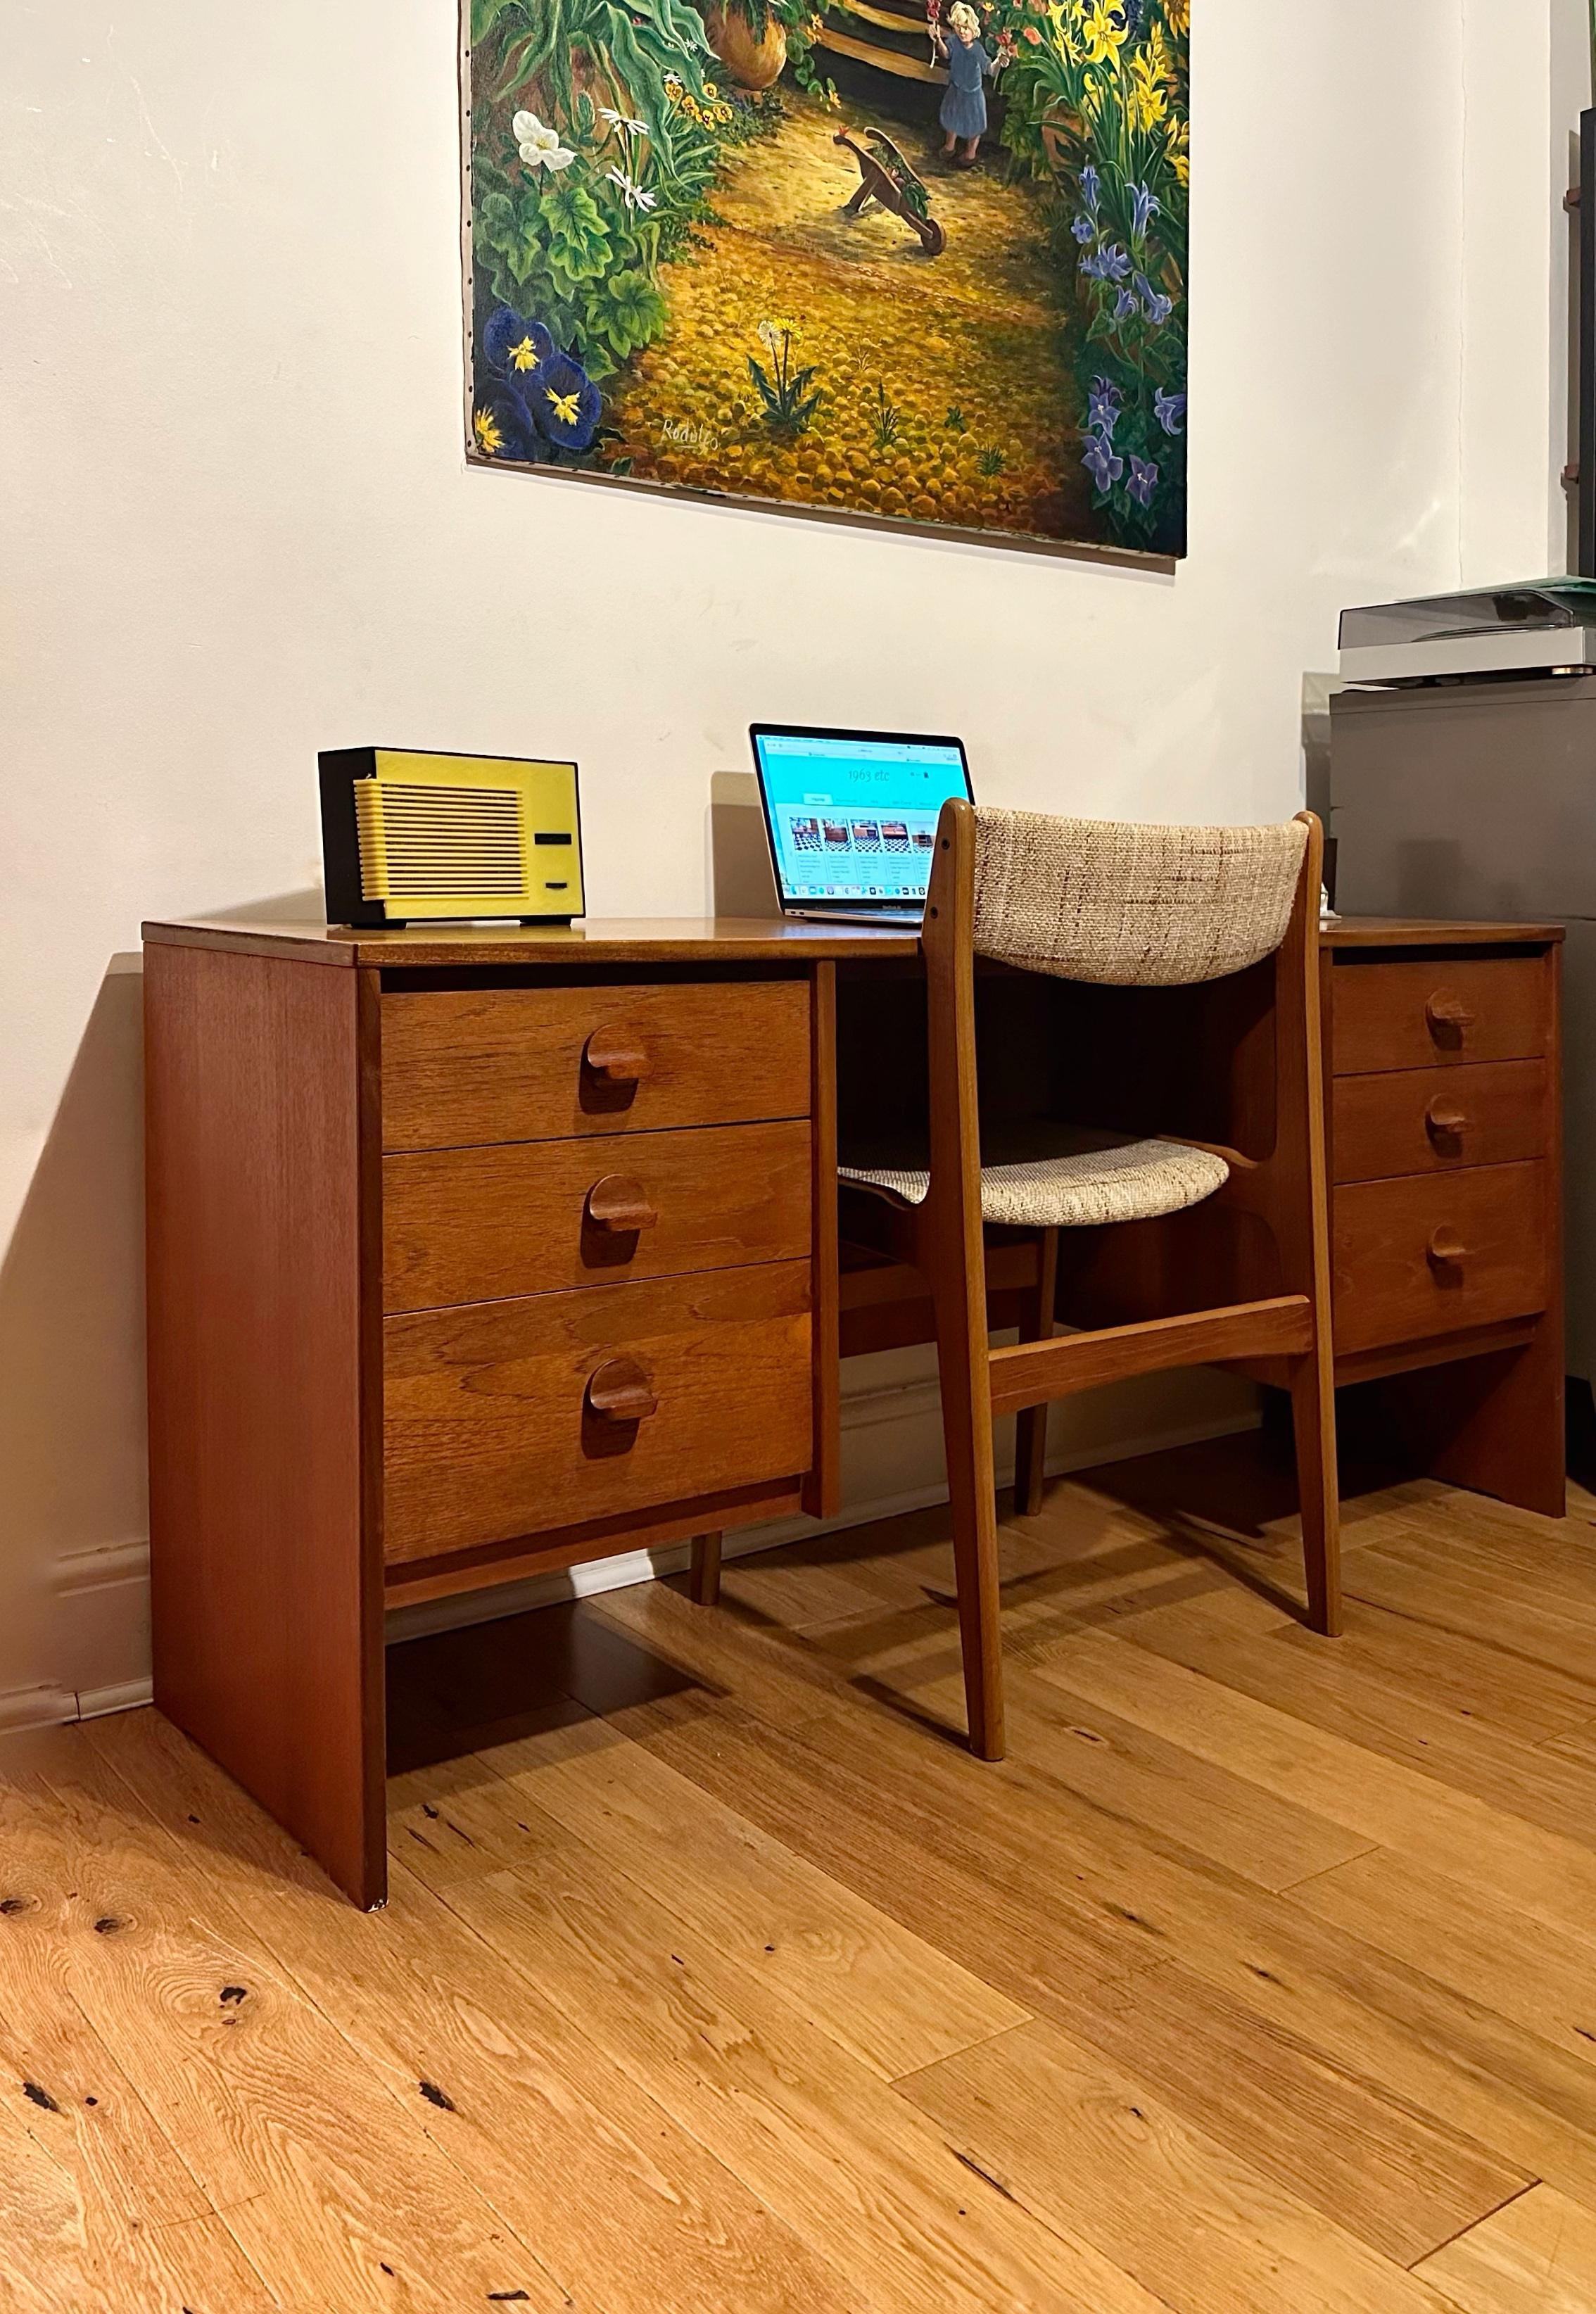 We’re happy to provide our own competitive shipping quotes with trusted couriers. Please message us with your postcode for a more accurate price. Thank you.

Stunning Mid-century 1960’s teak desk by Stag. Three spacious drawers on each side with